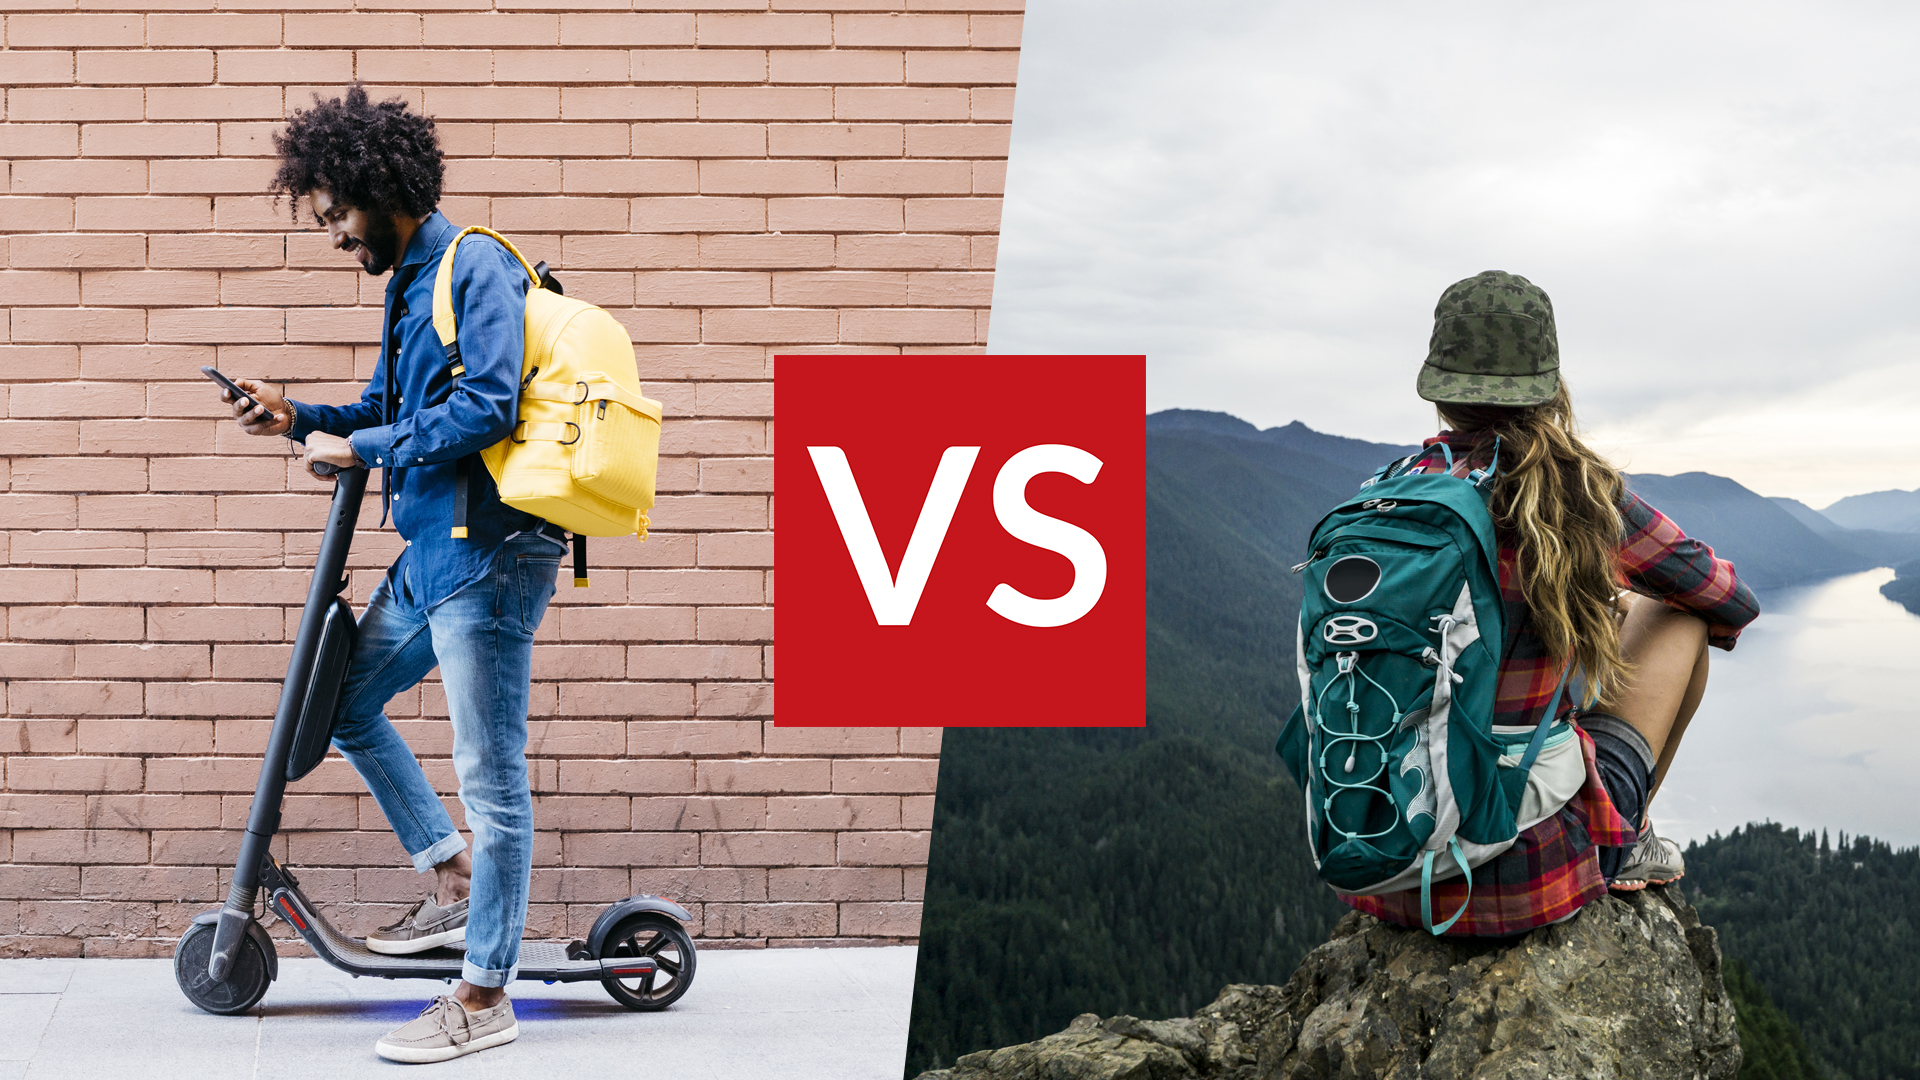 Backpack vs Rucksack: what's the difference?